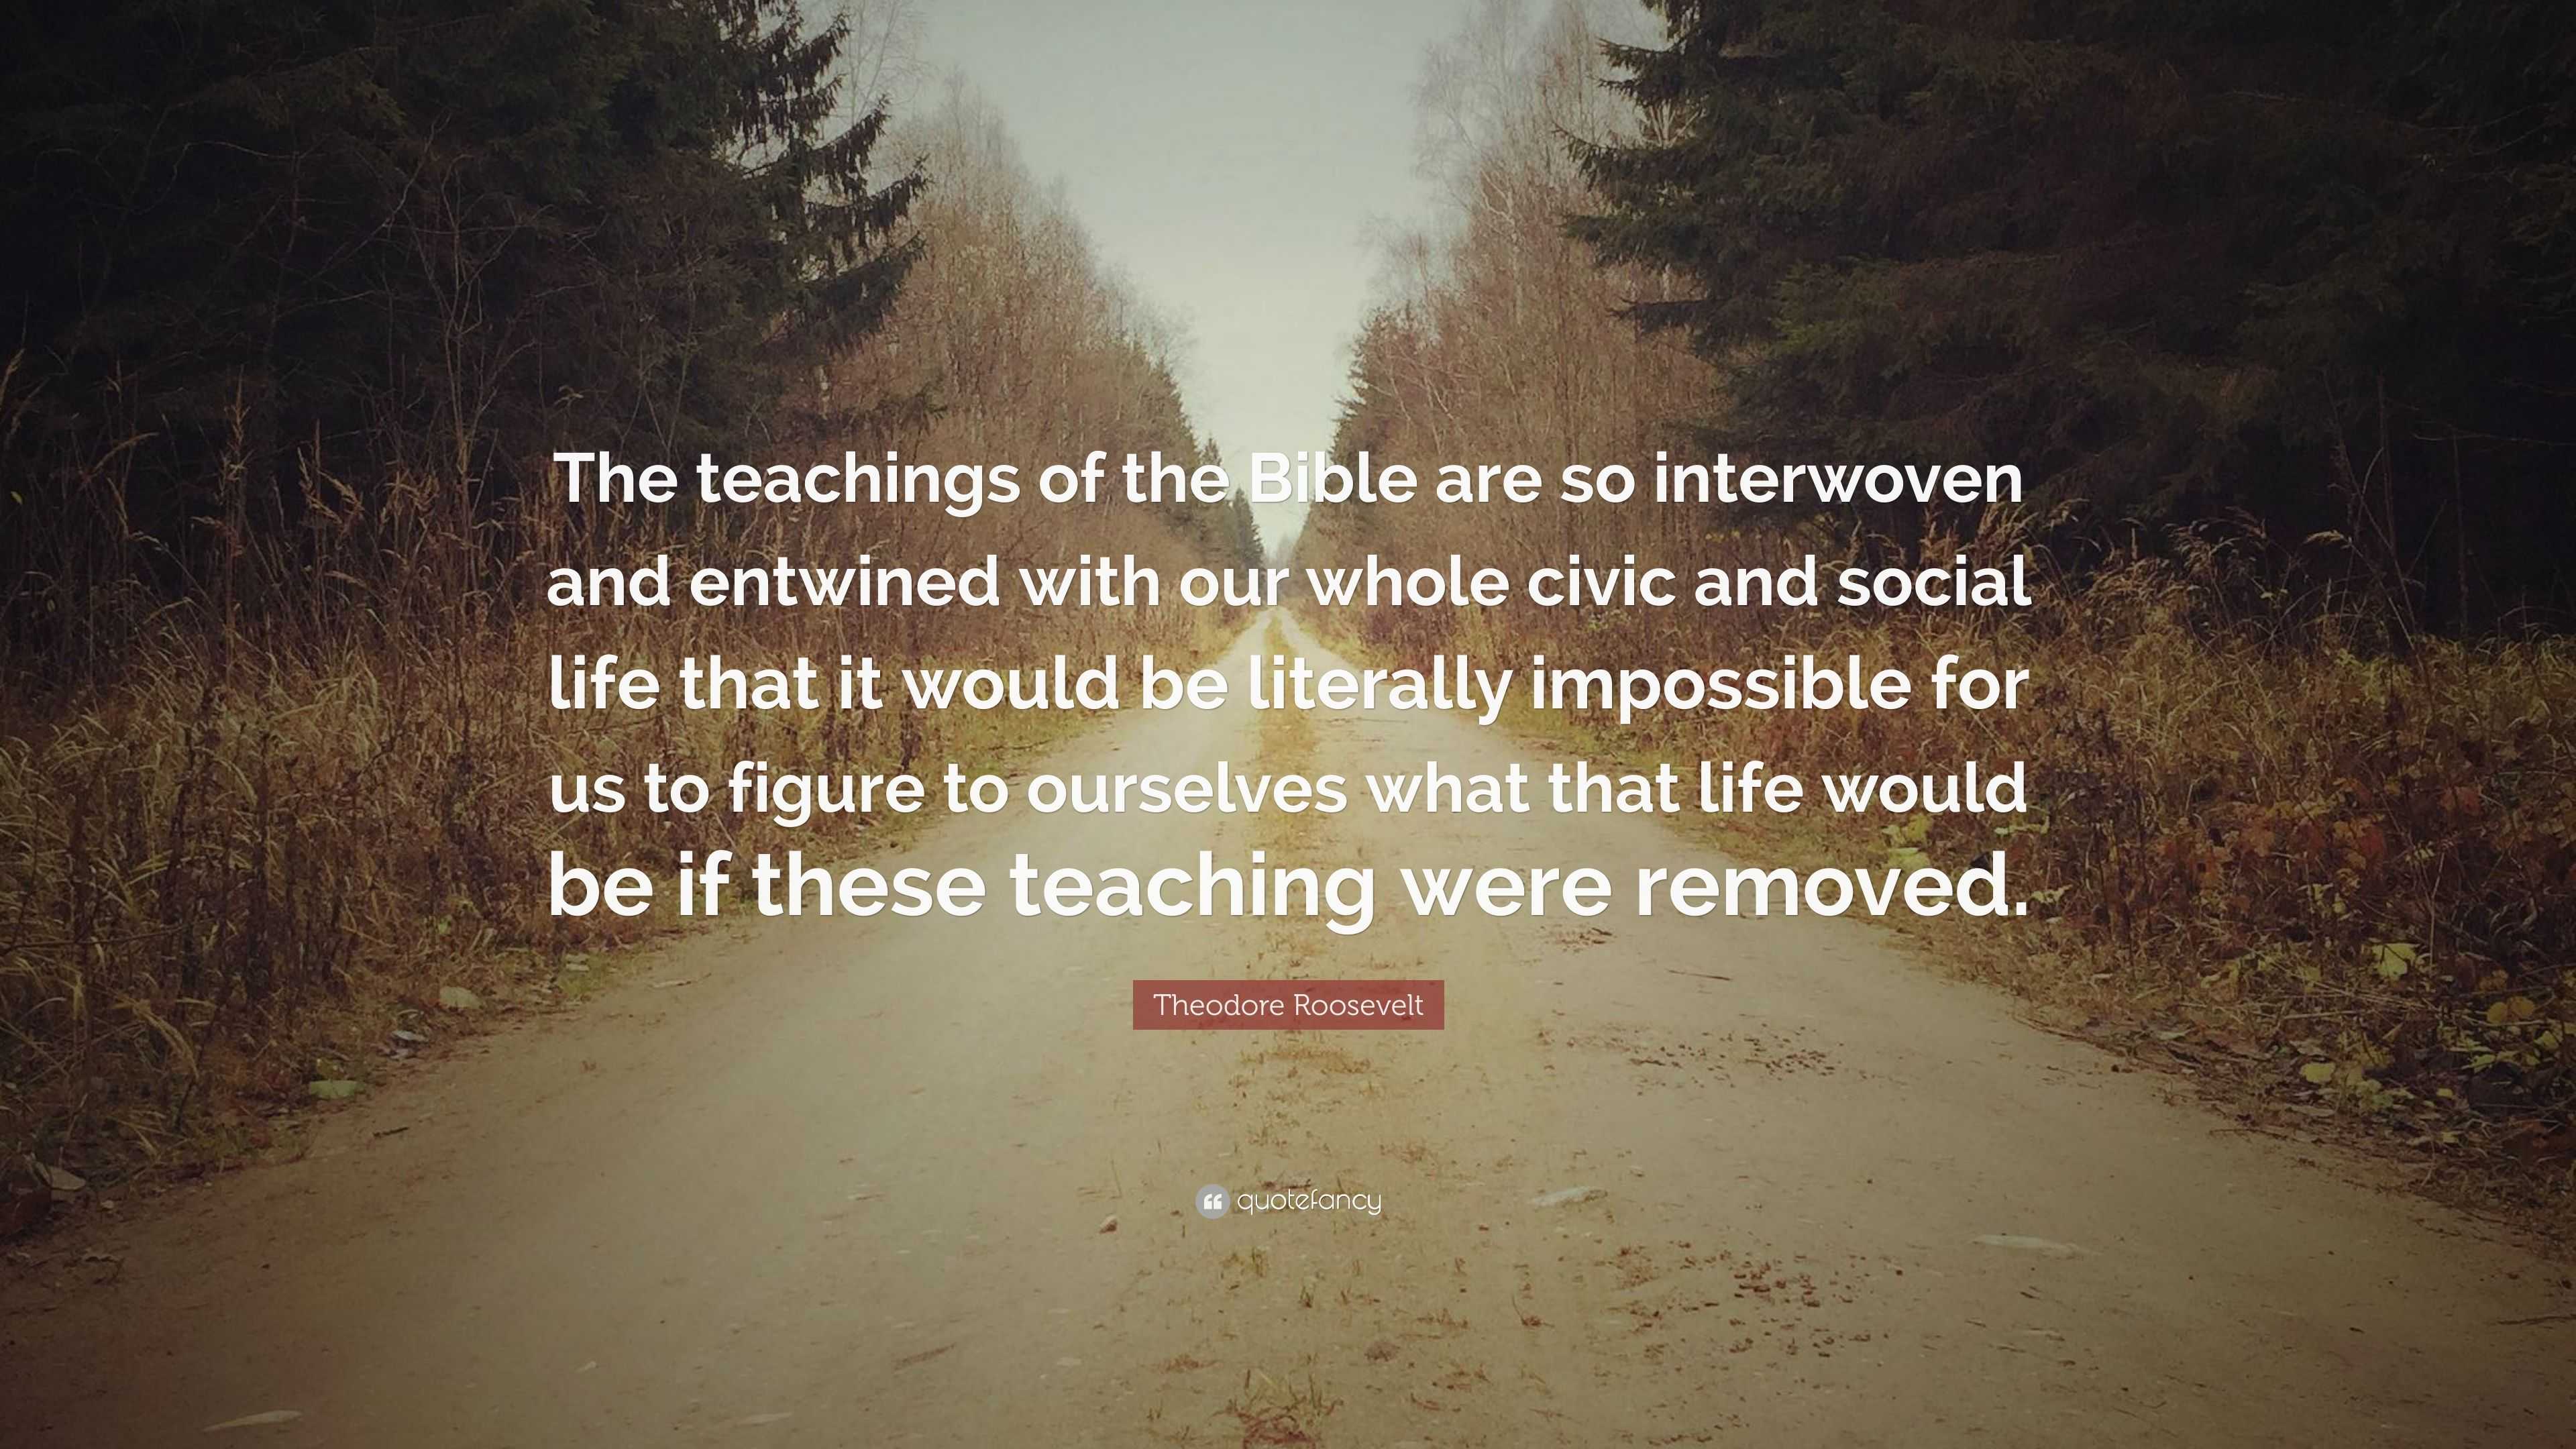 Theodore Roosevelt Quote: “The teachings of the Bible are so interwoven ...